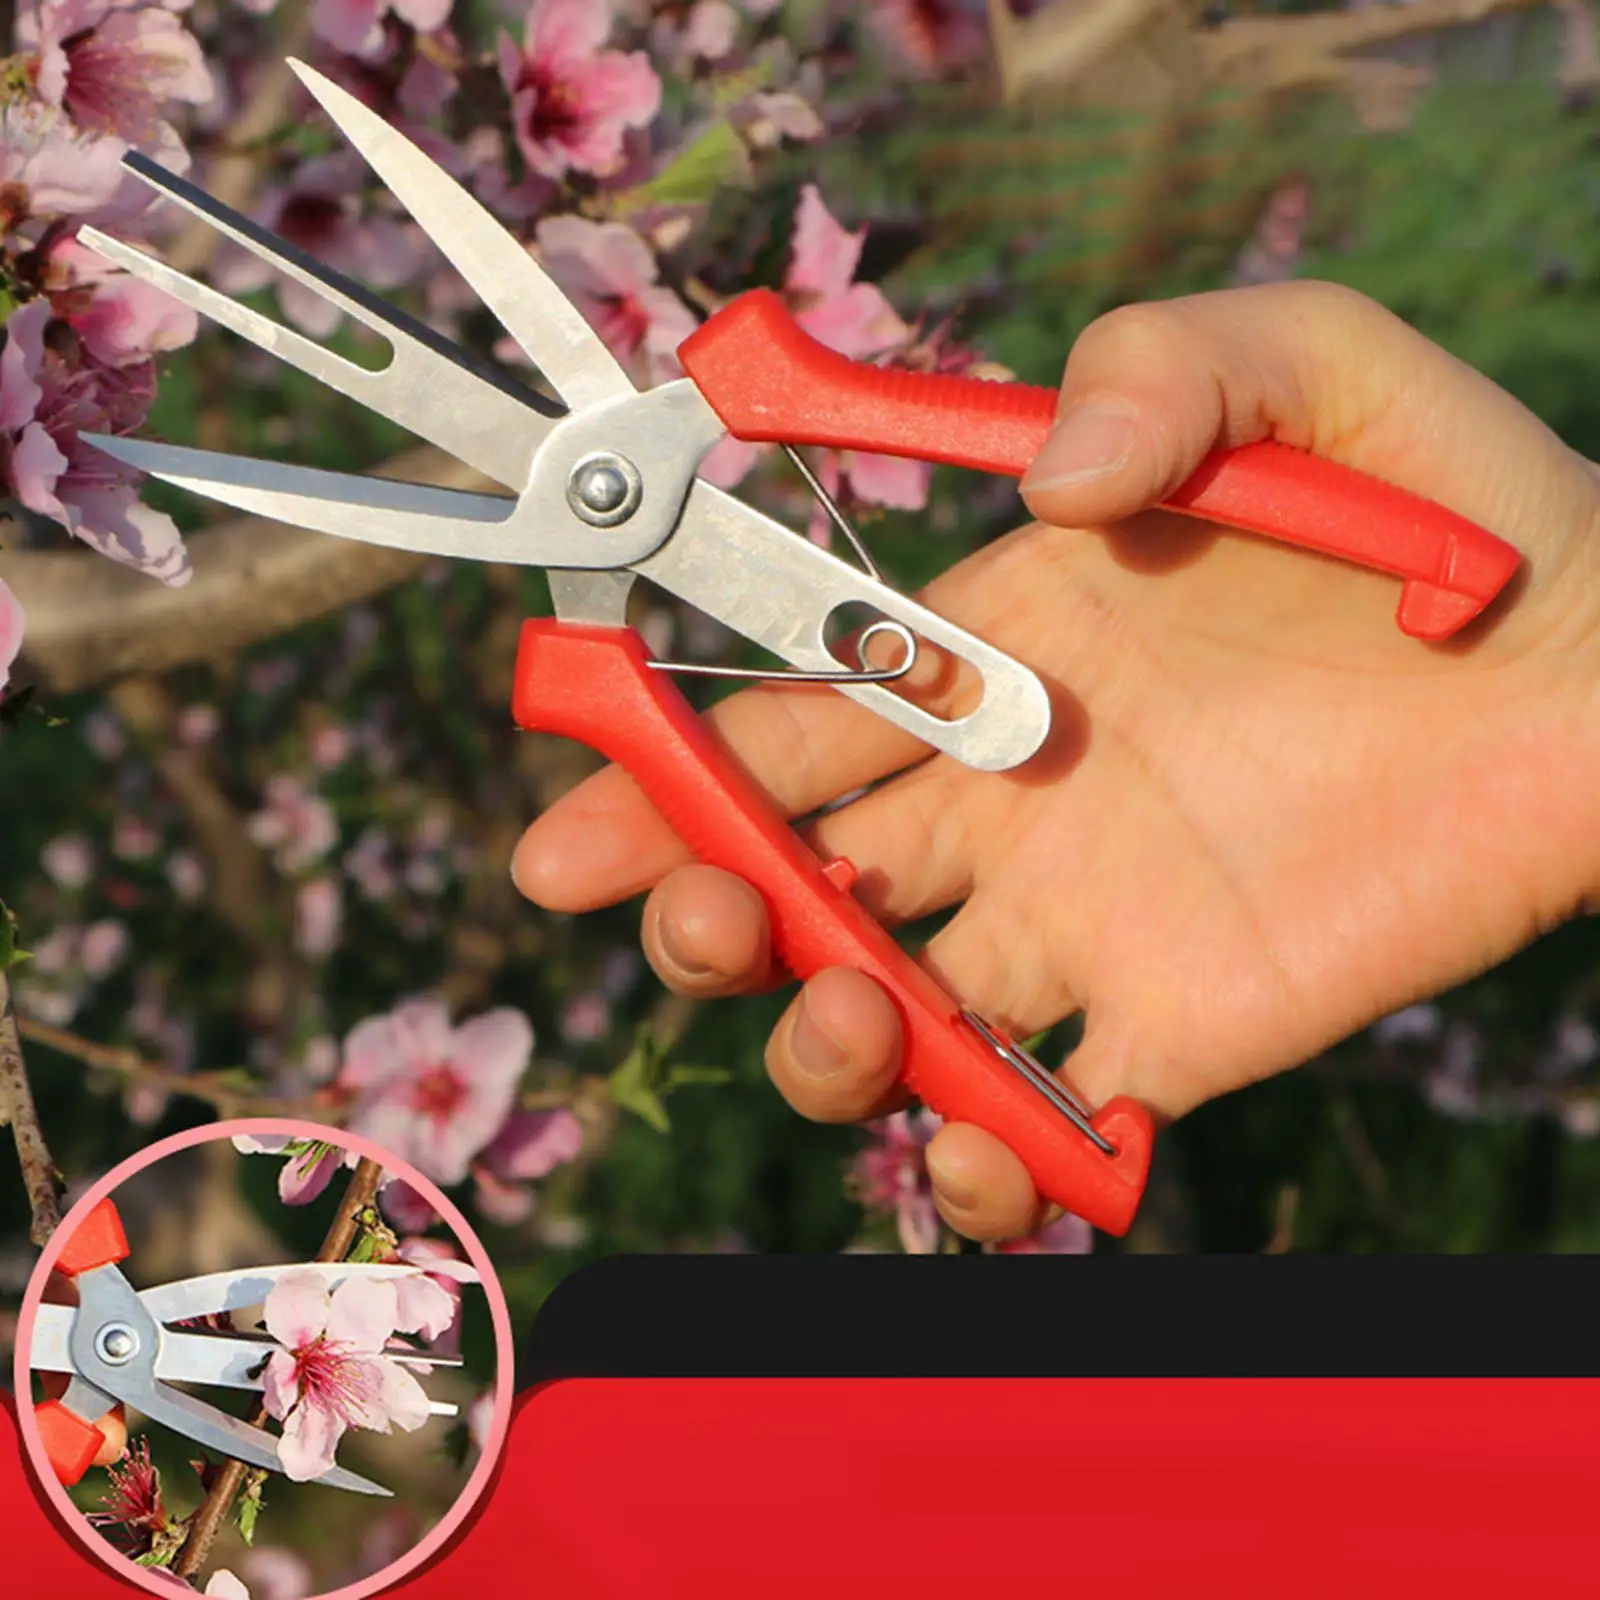 Garden Shears Professional Clippers Multi Use Secateurs for Gardening Stems